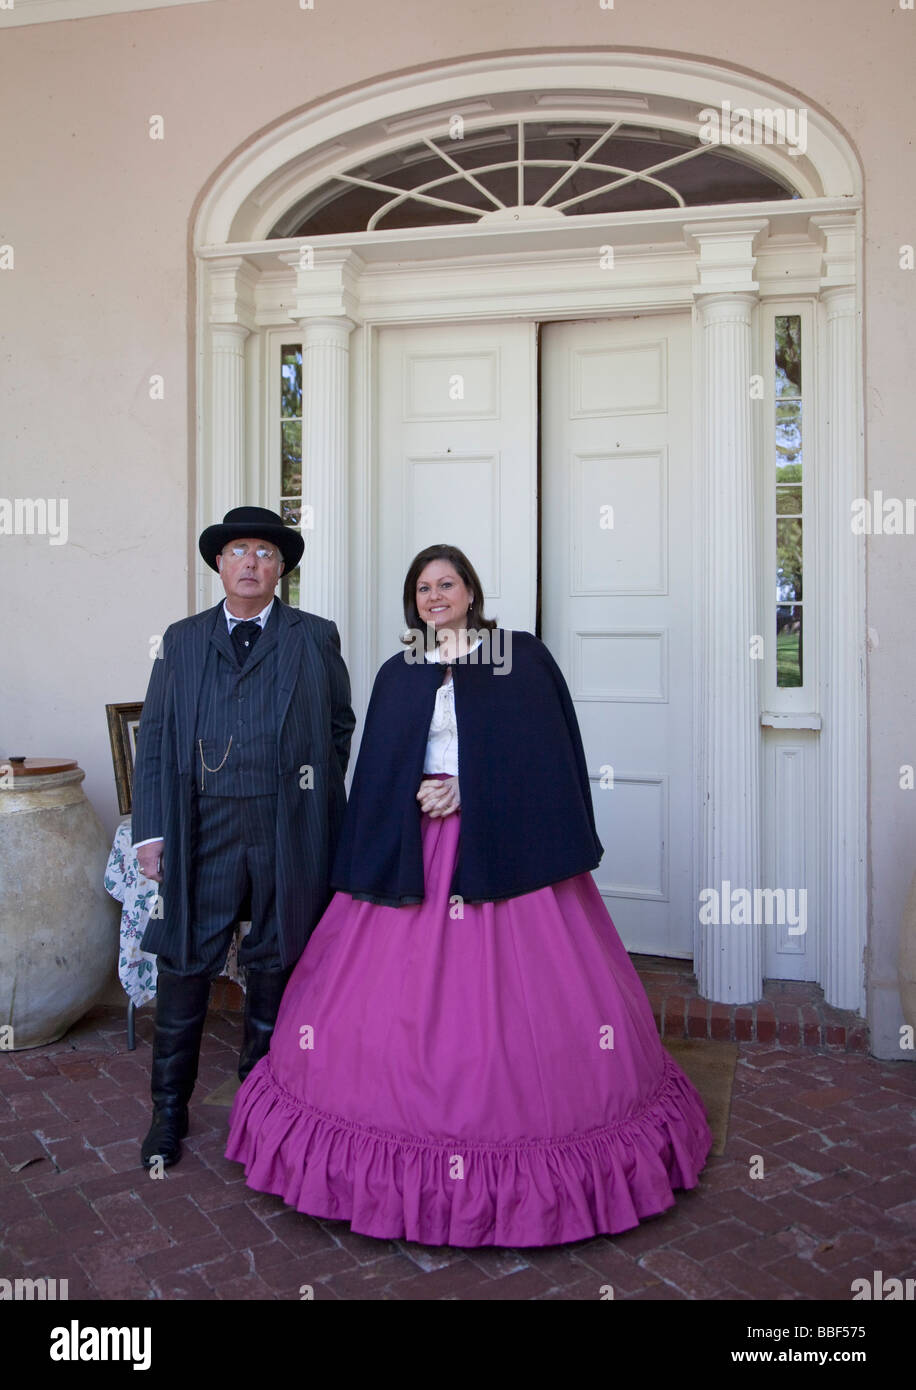 Vacherie Louisiana Tour guides dressed in period costumes at the restored Oak Alley Plantation Stock Photo